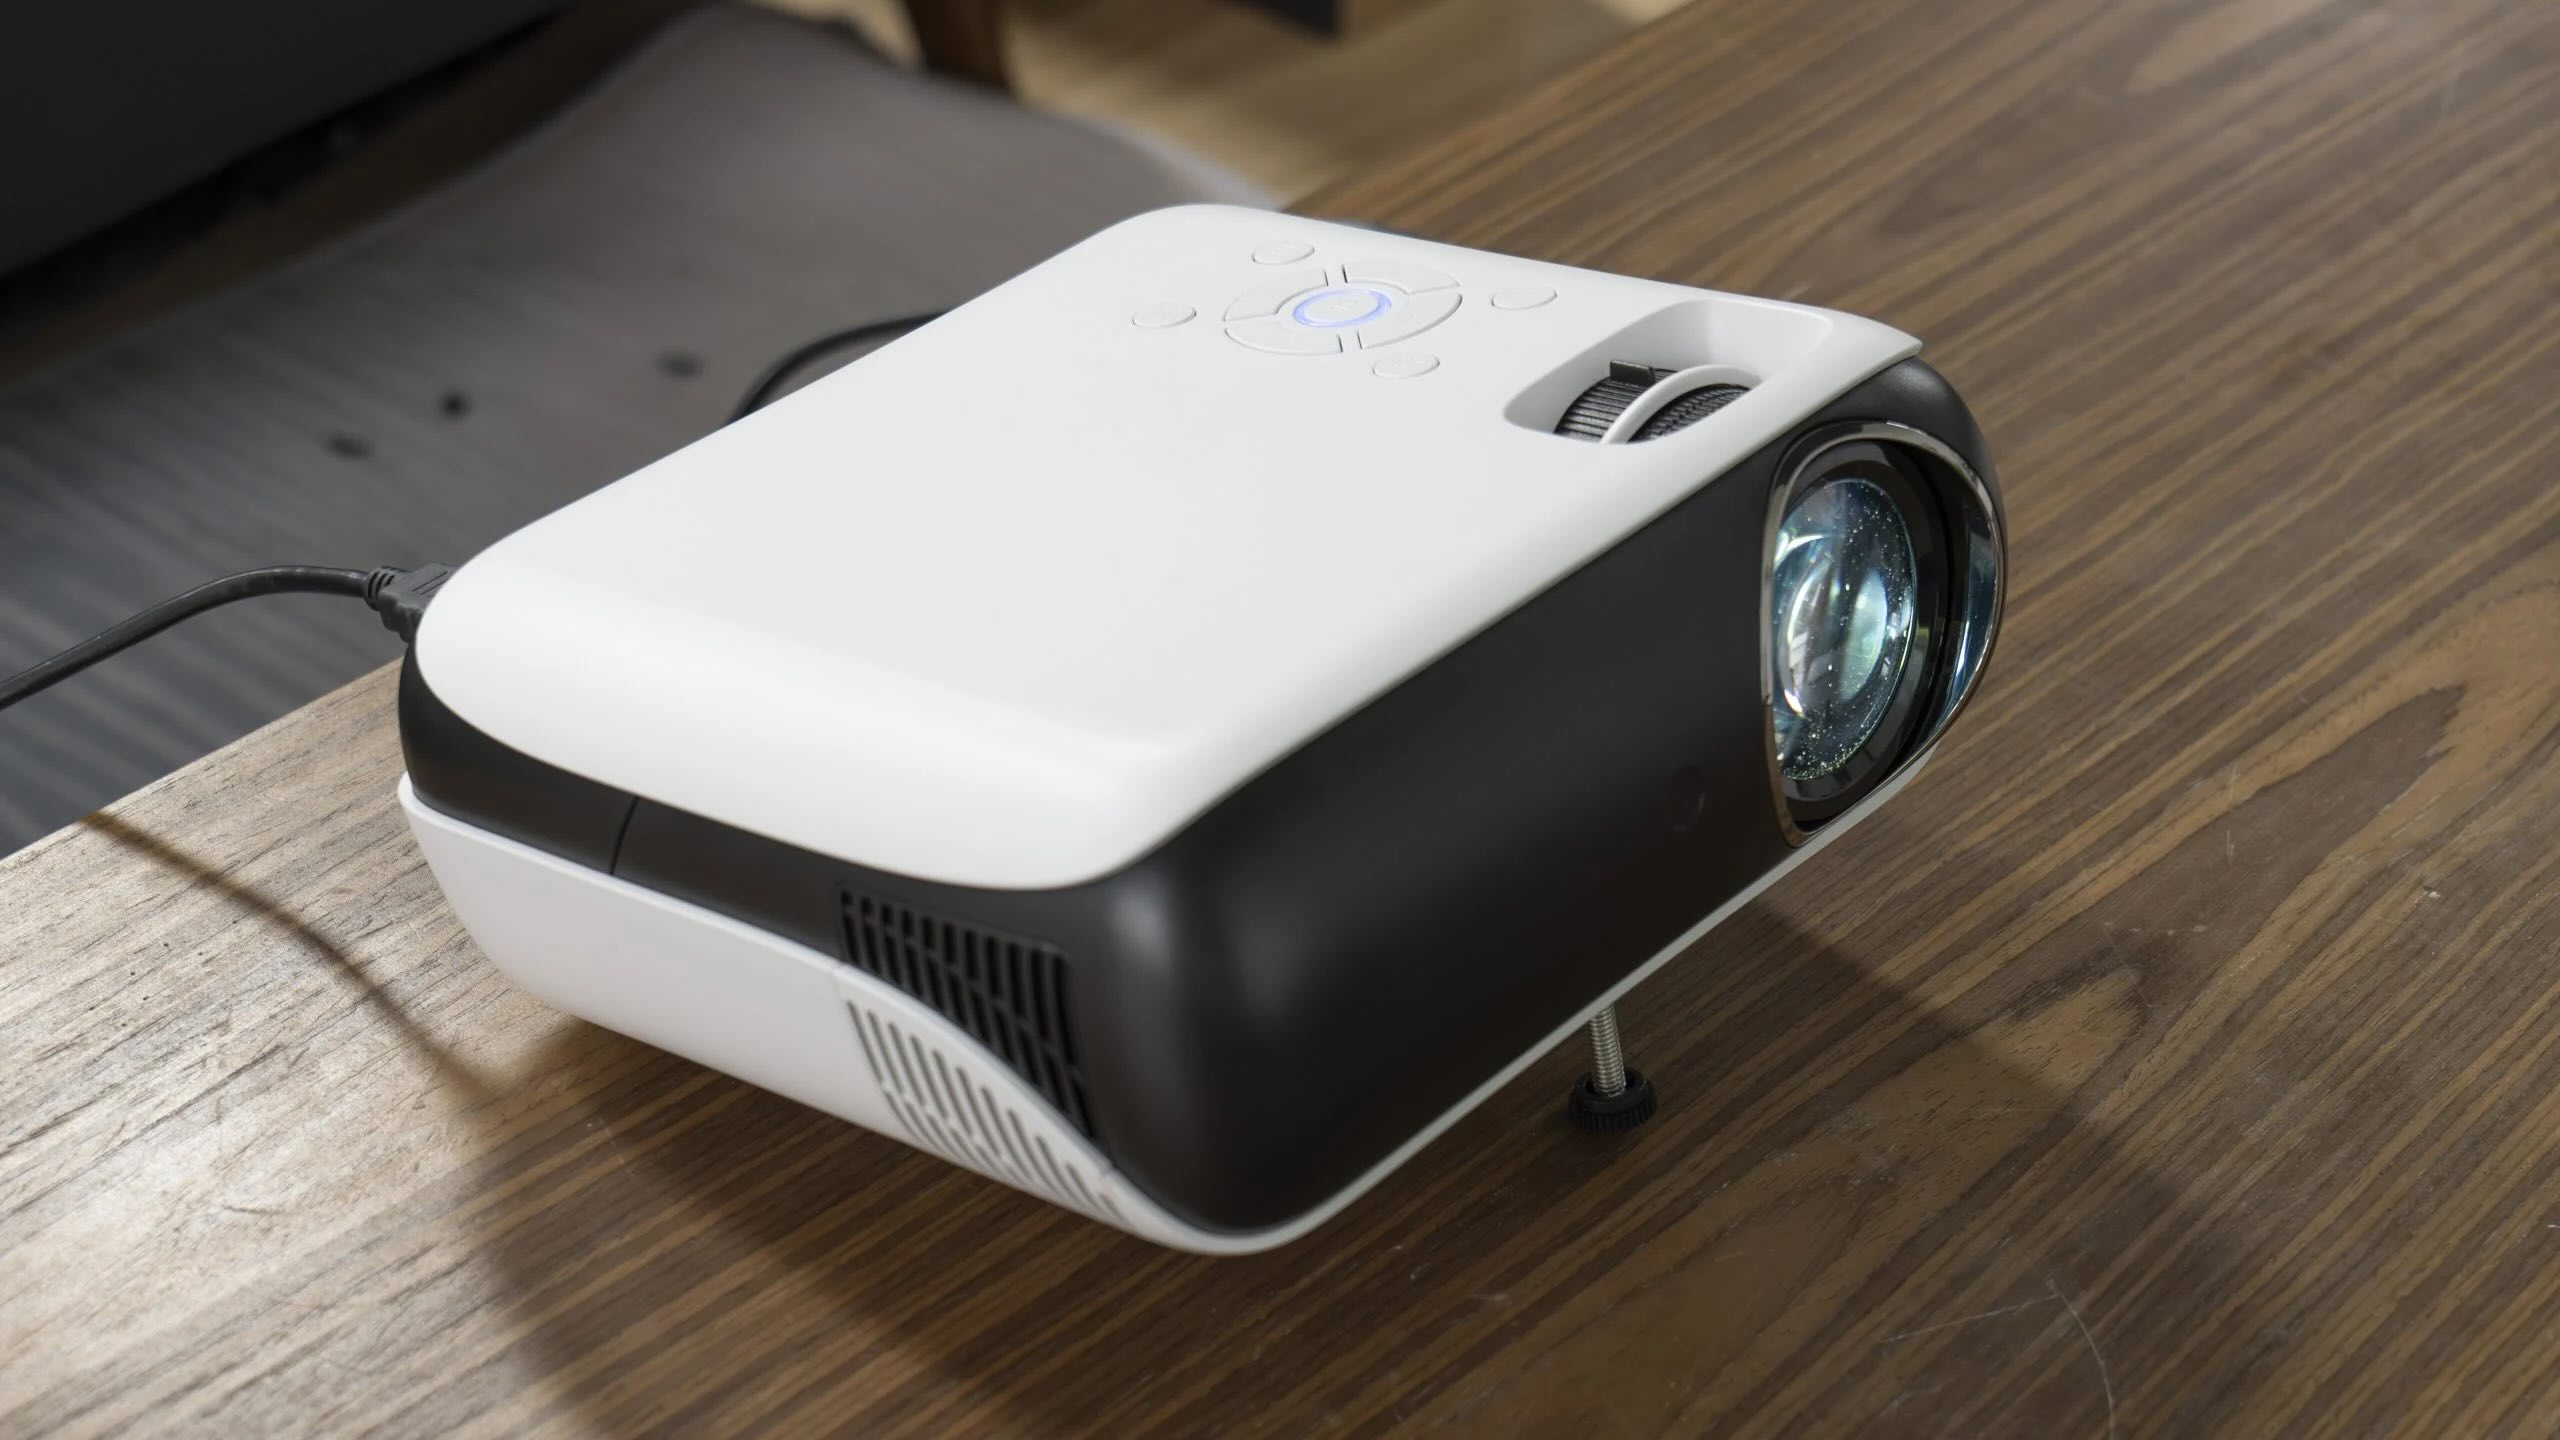 How To Adjust Brightness On Projector